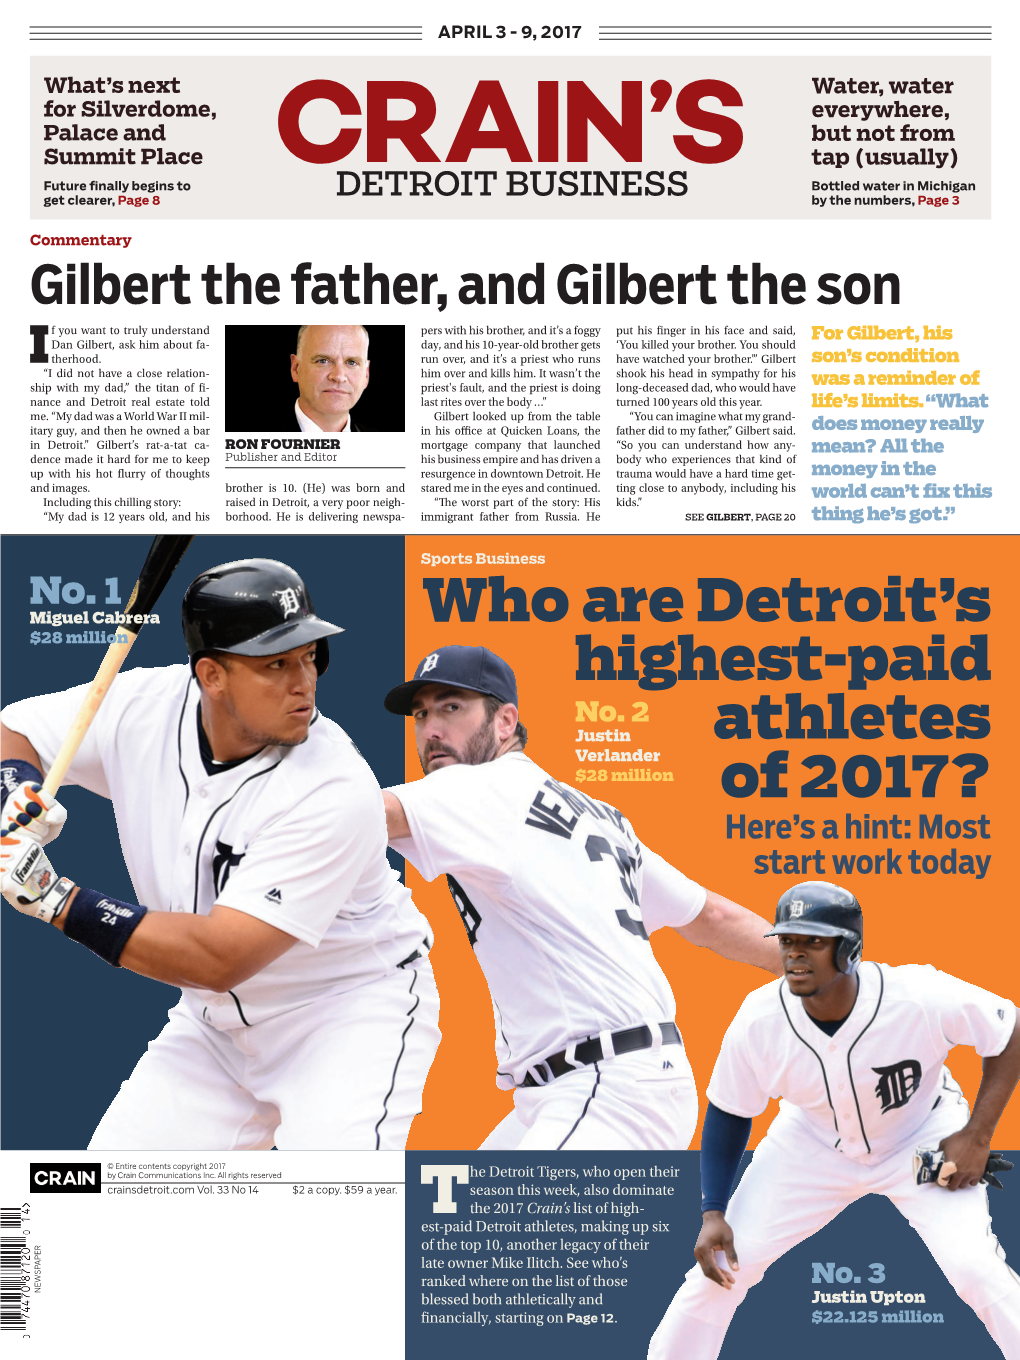 Who Are Detroit's Highest-Paid Athletes of 2017?